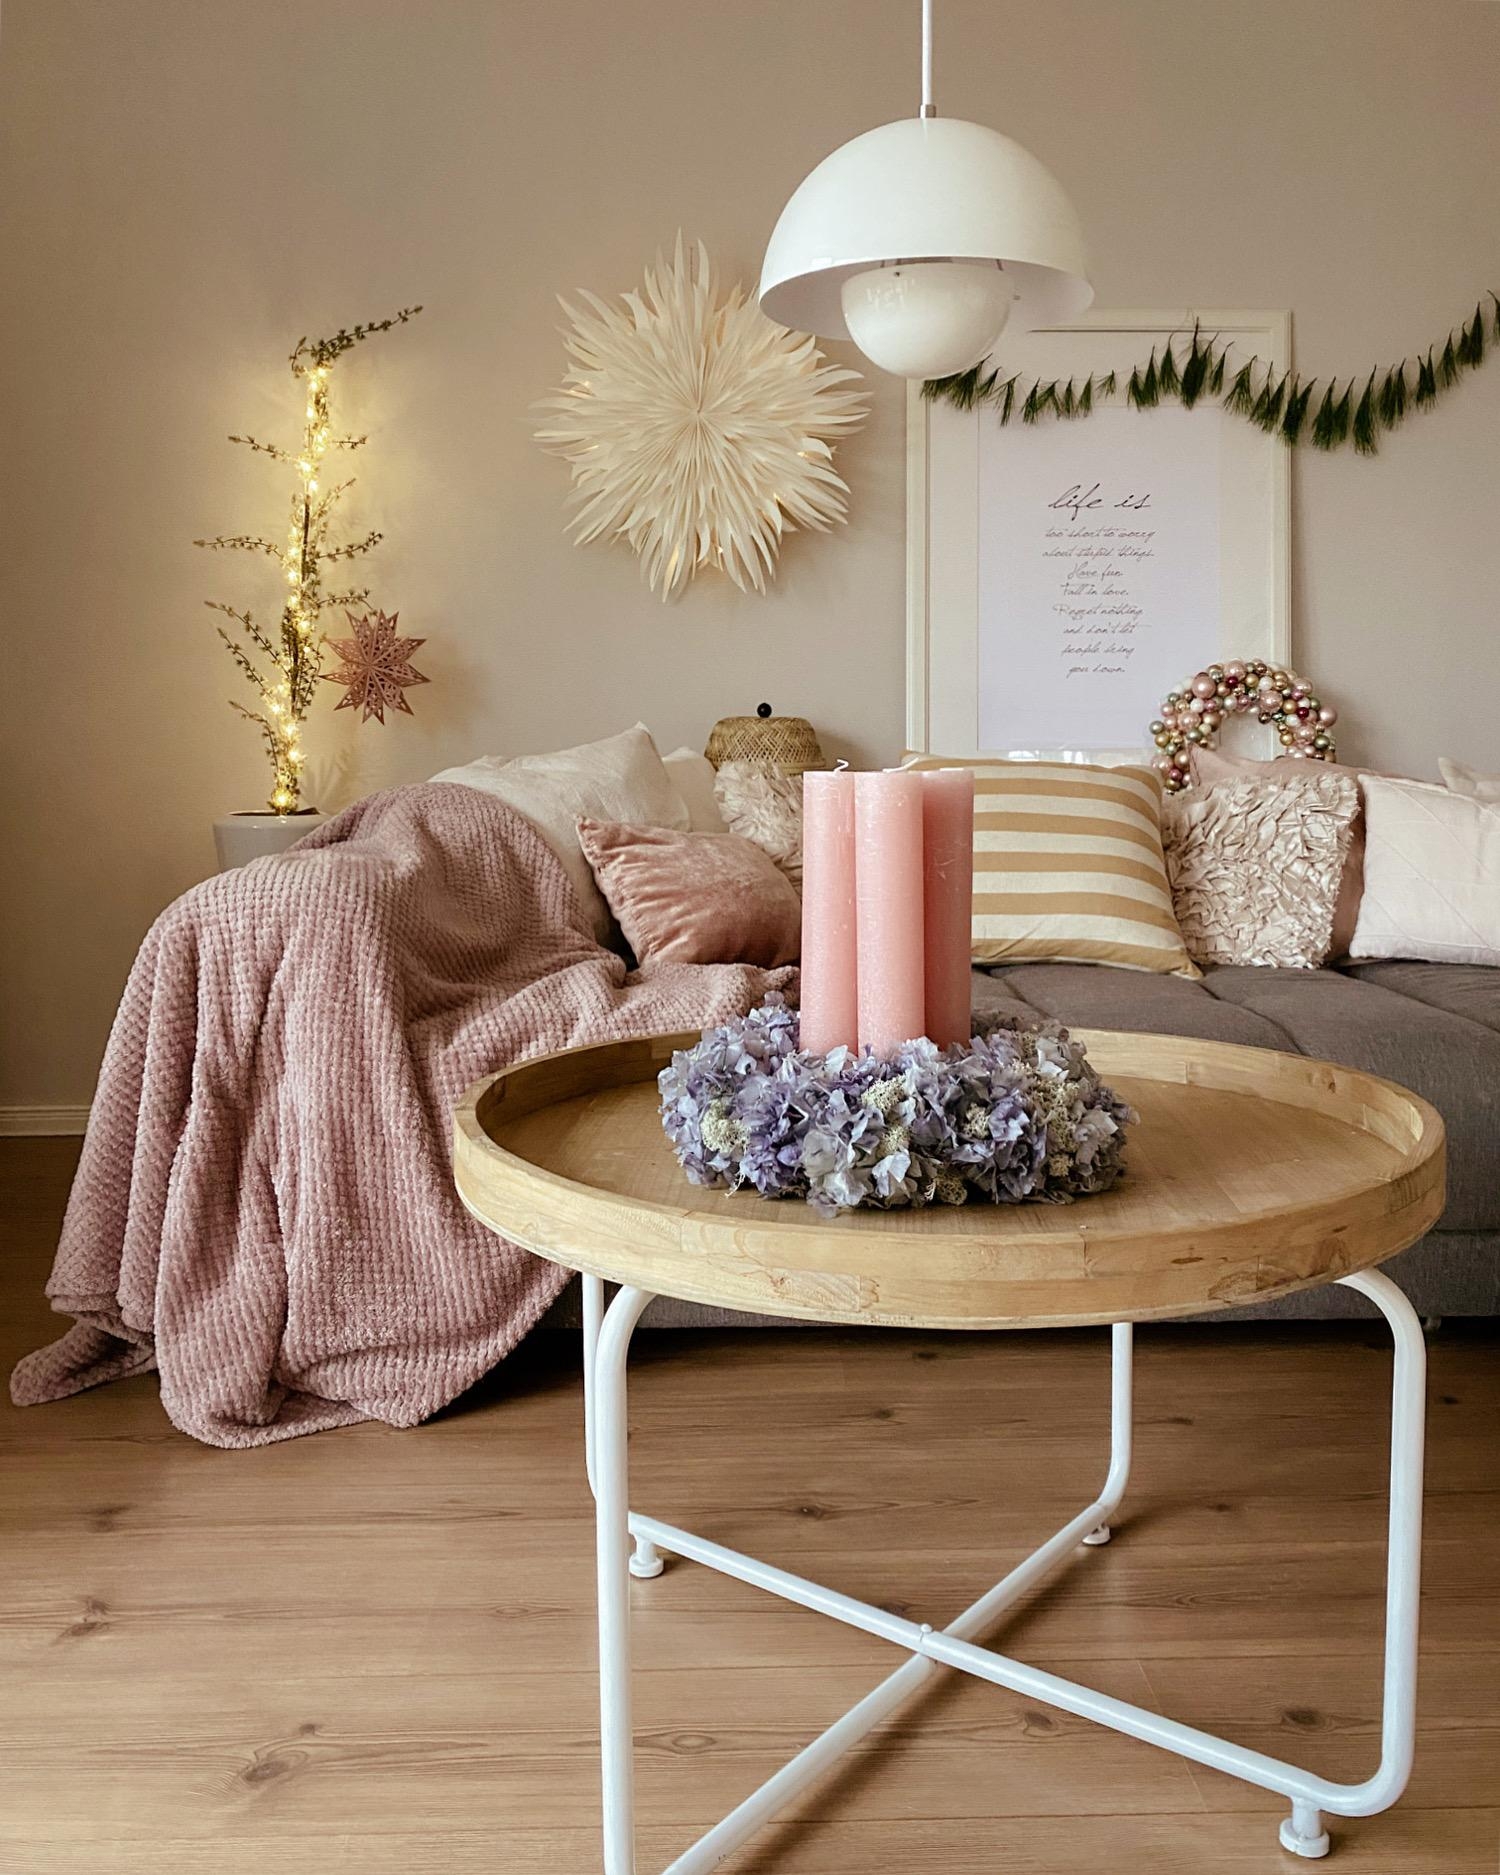 Hygge
#hyggehome#lampenliebe#christmasdecor#couchstyle#interiorliebe#cozyhome